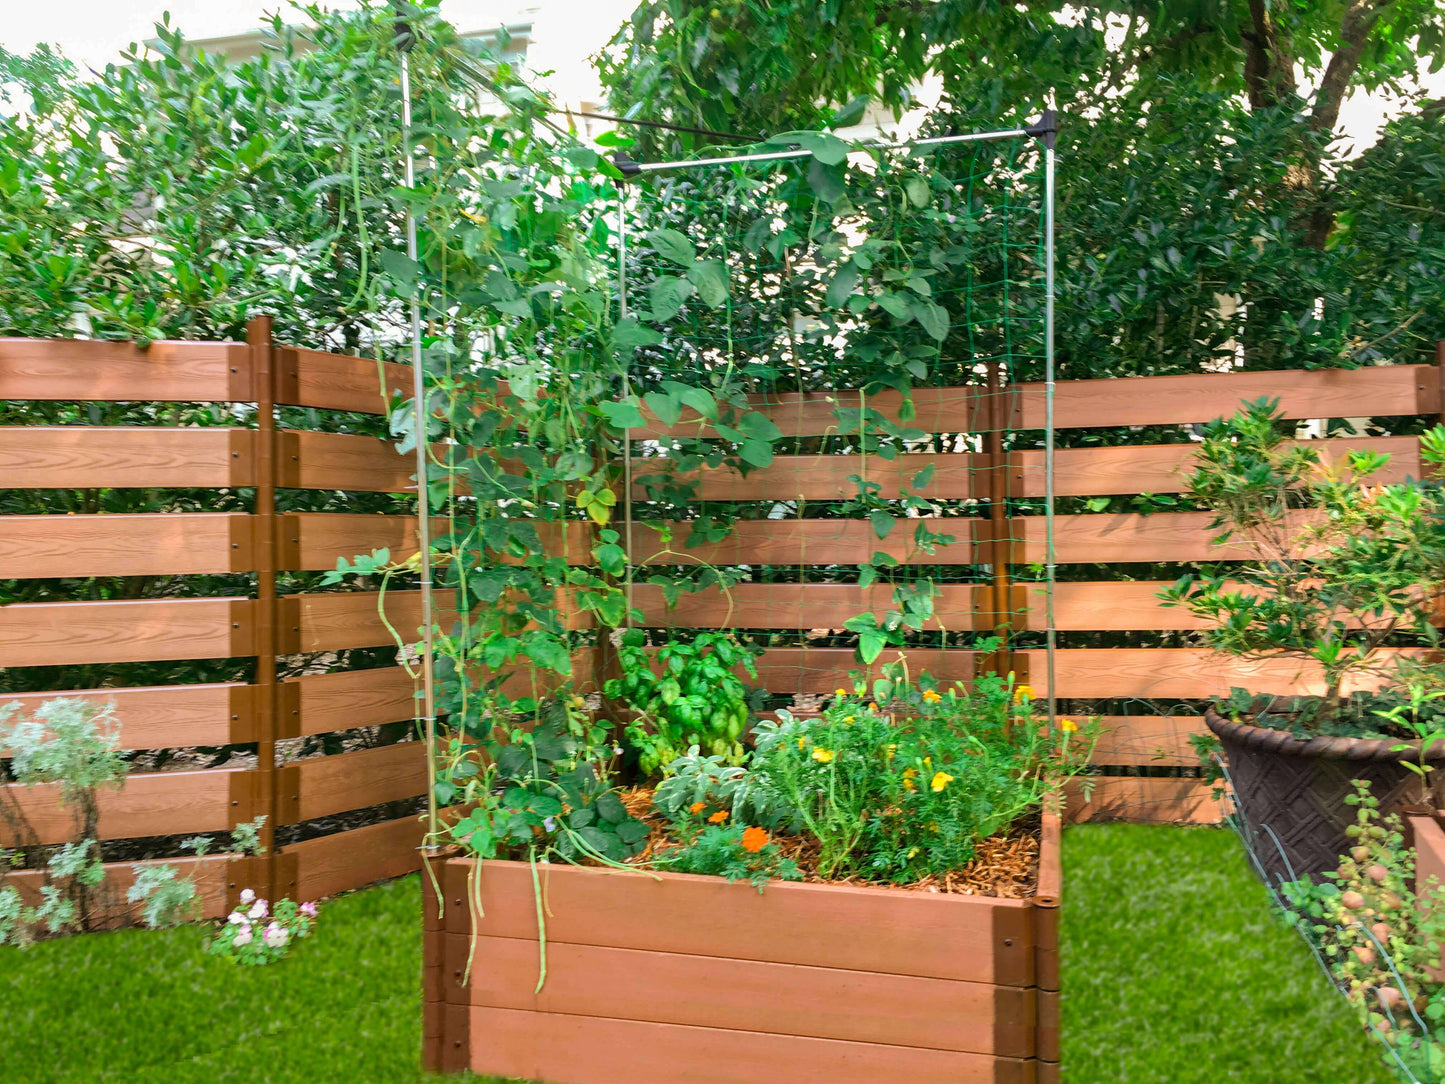 4' x 4' Raised Garden Bed with Trellis Raised Garden Beds Frame It All Classic Sienna 1" 3 = 16.5"